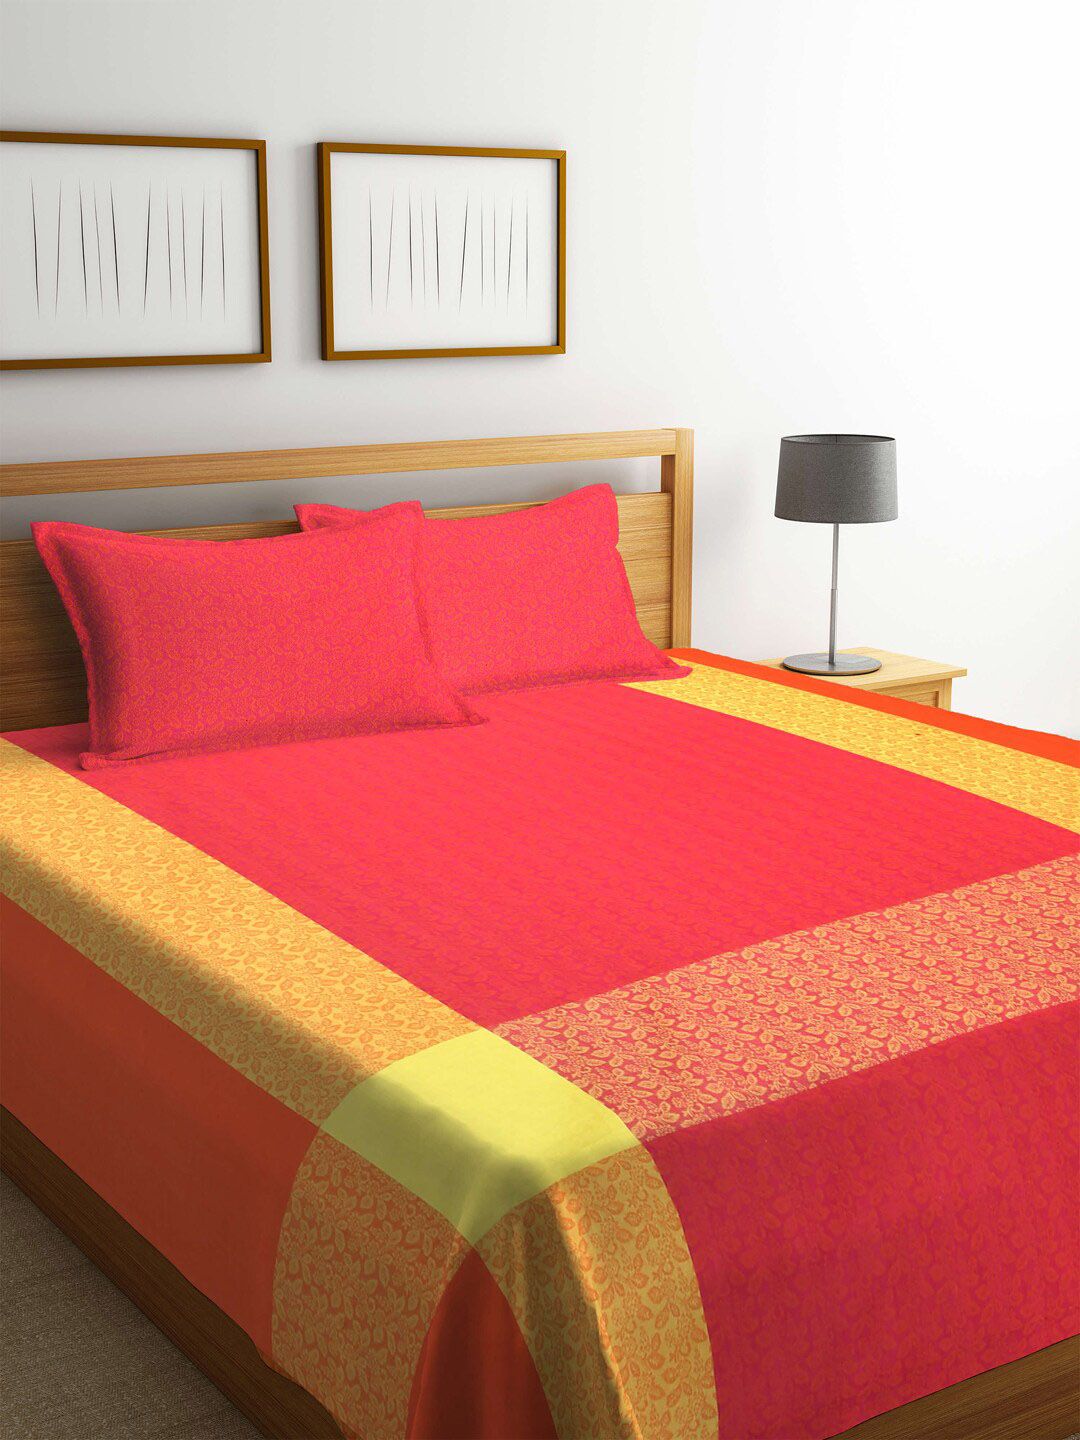 Arrabi Unisex Orange & Yellow Colourblocked Handwoven Cotton Double Size Bedcover with 2 Pillow Cover Price in India